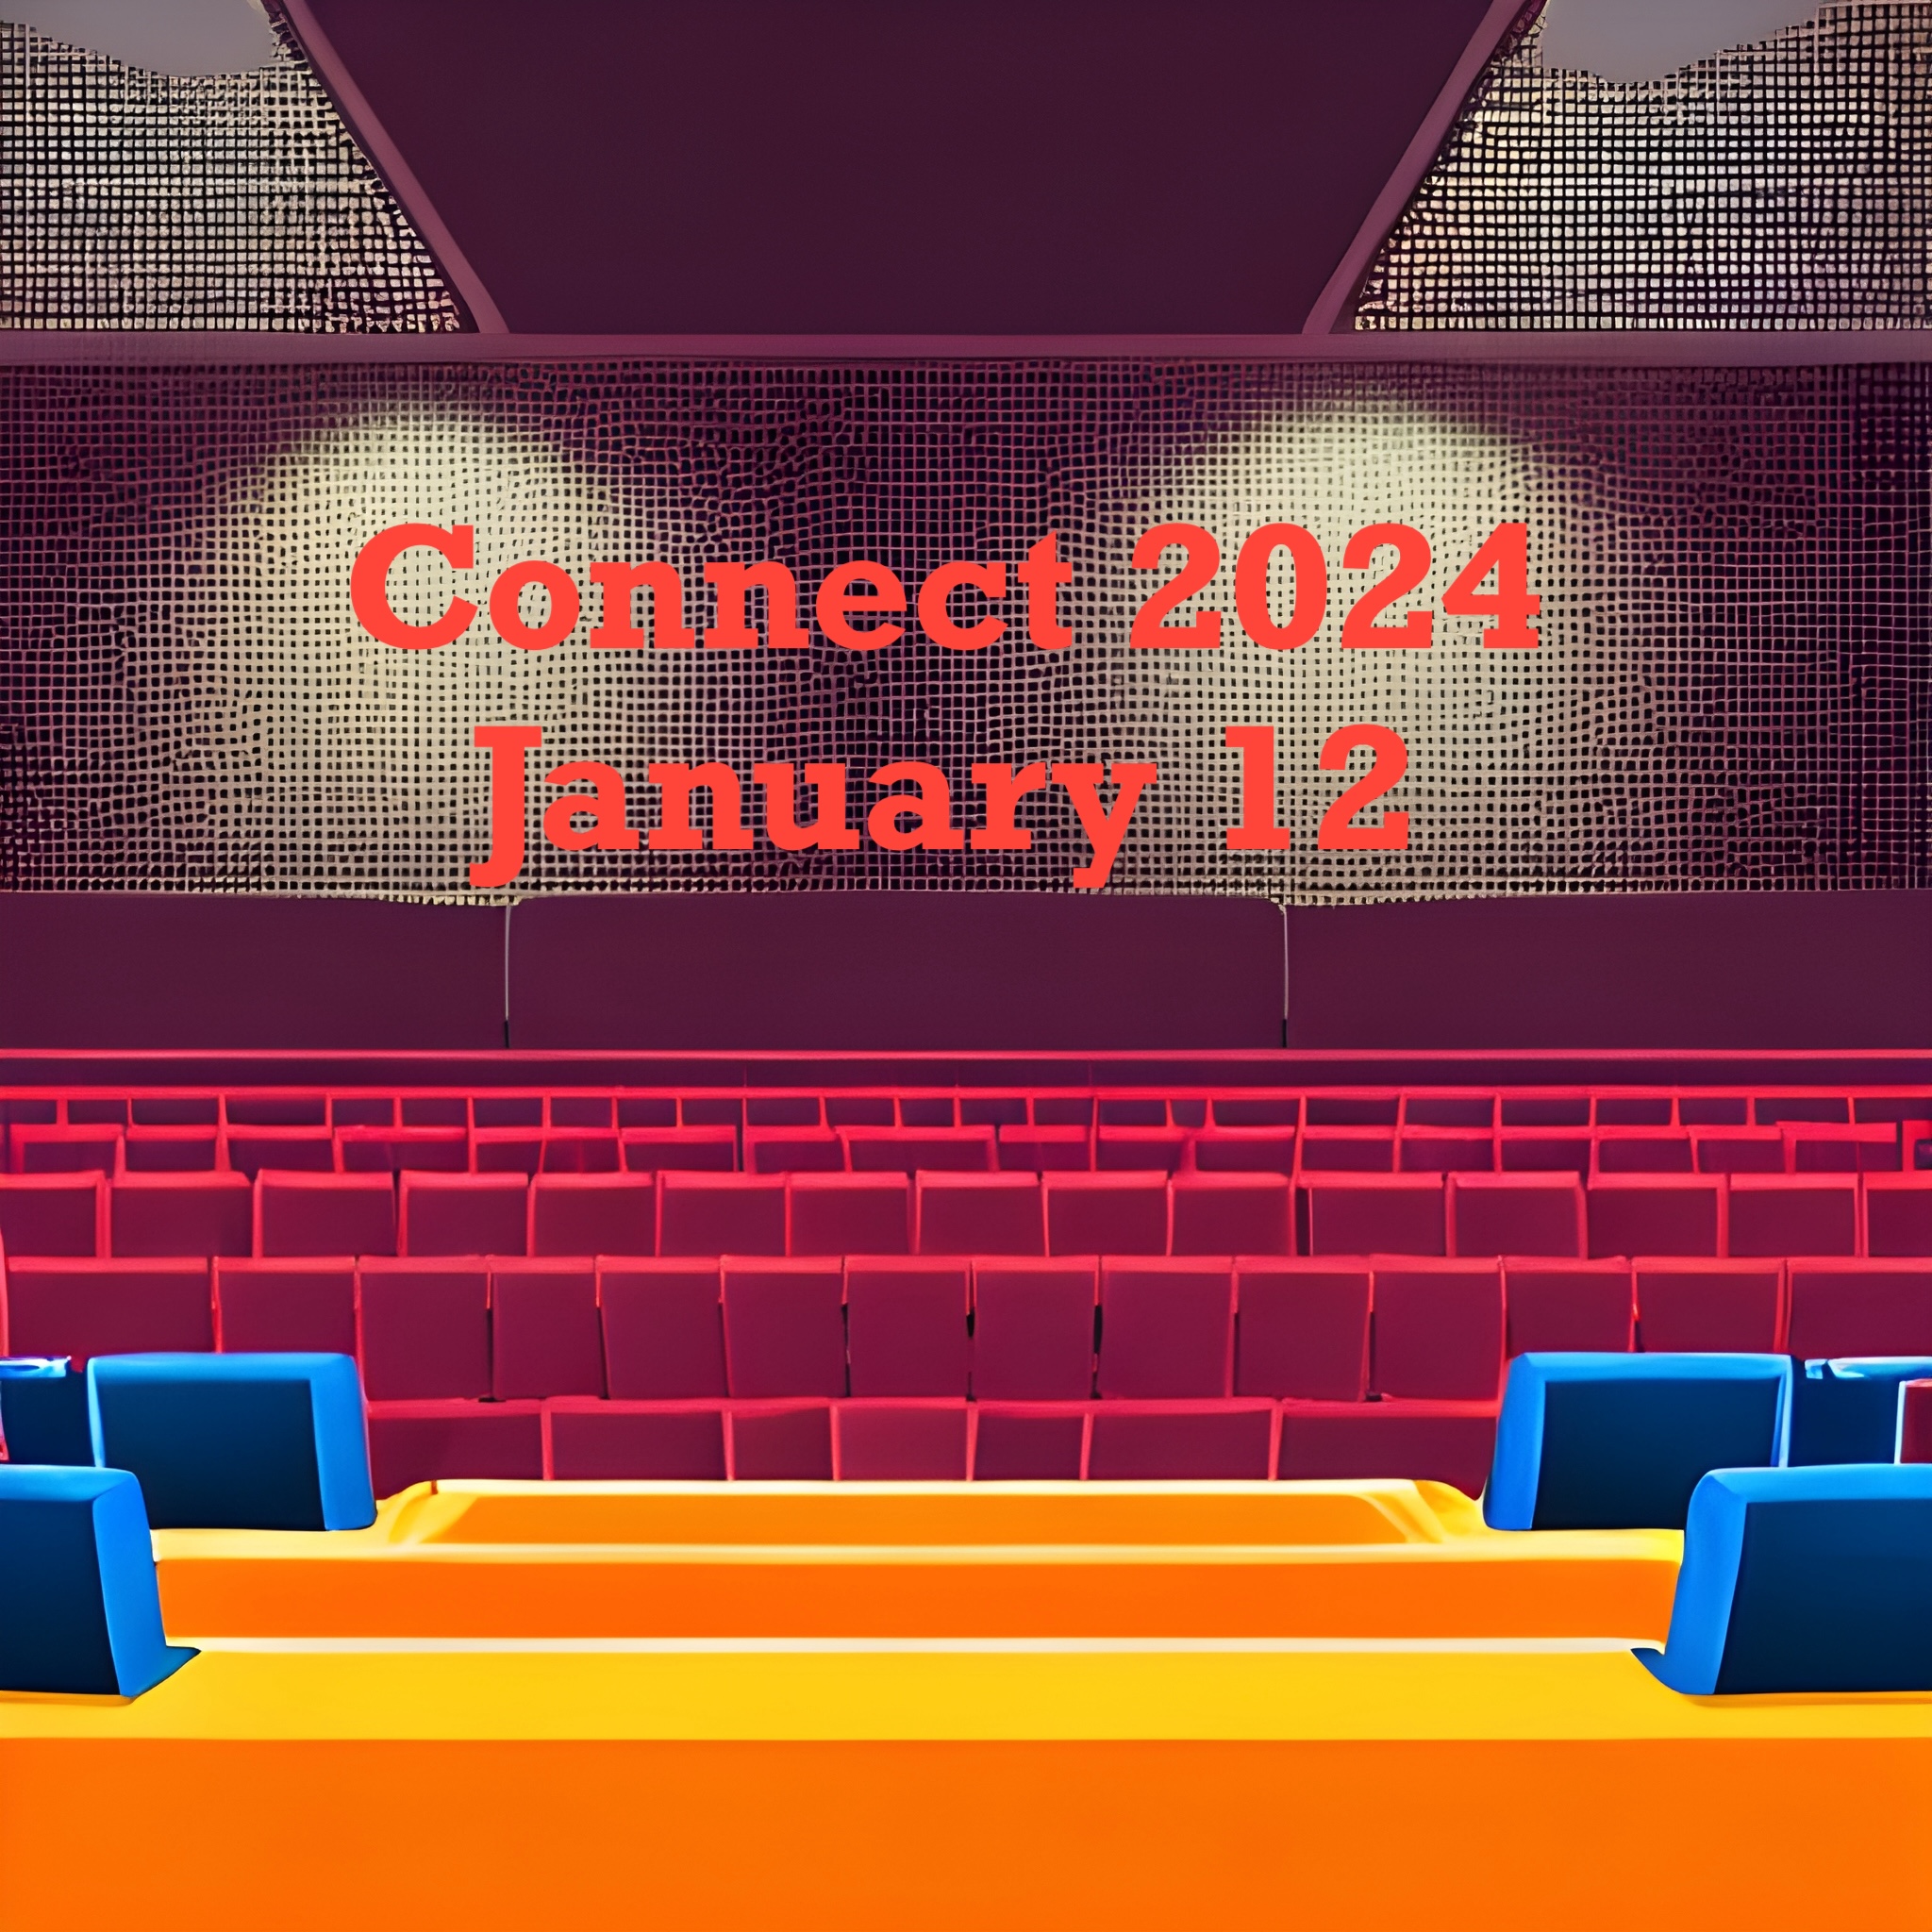 Ontario_Section/connect2024.jpeg